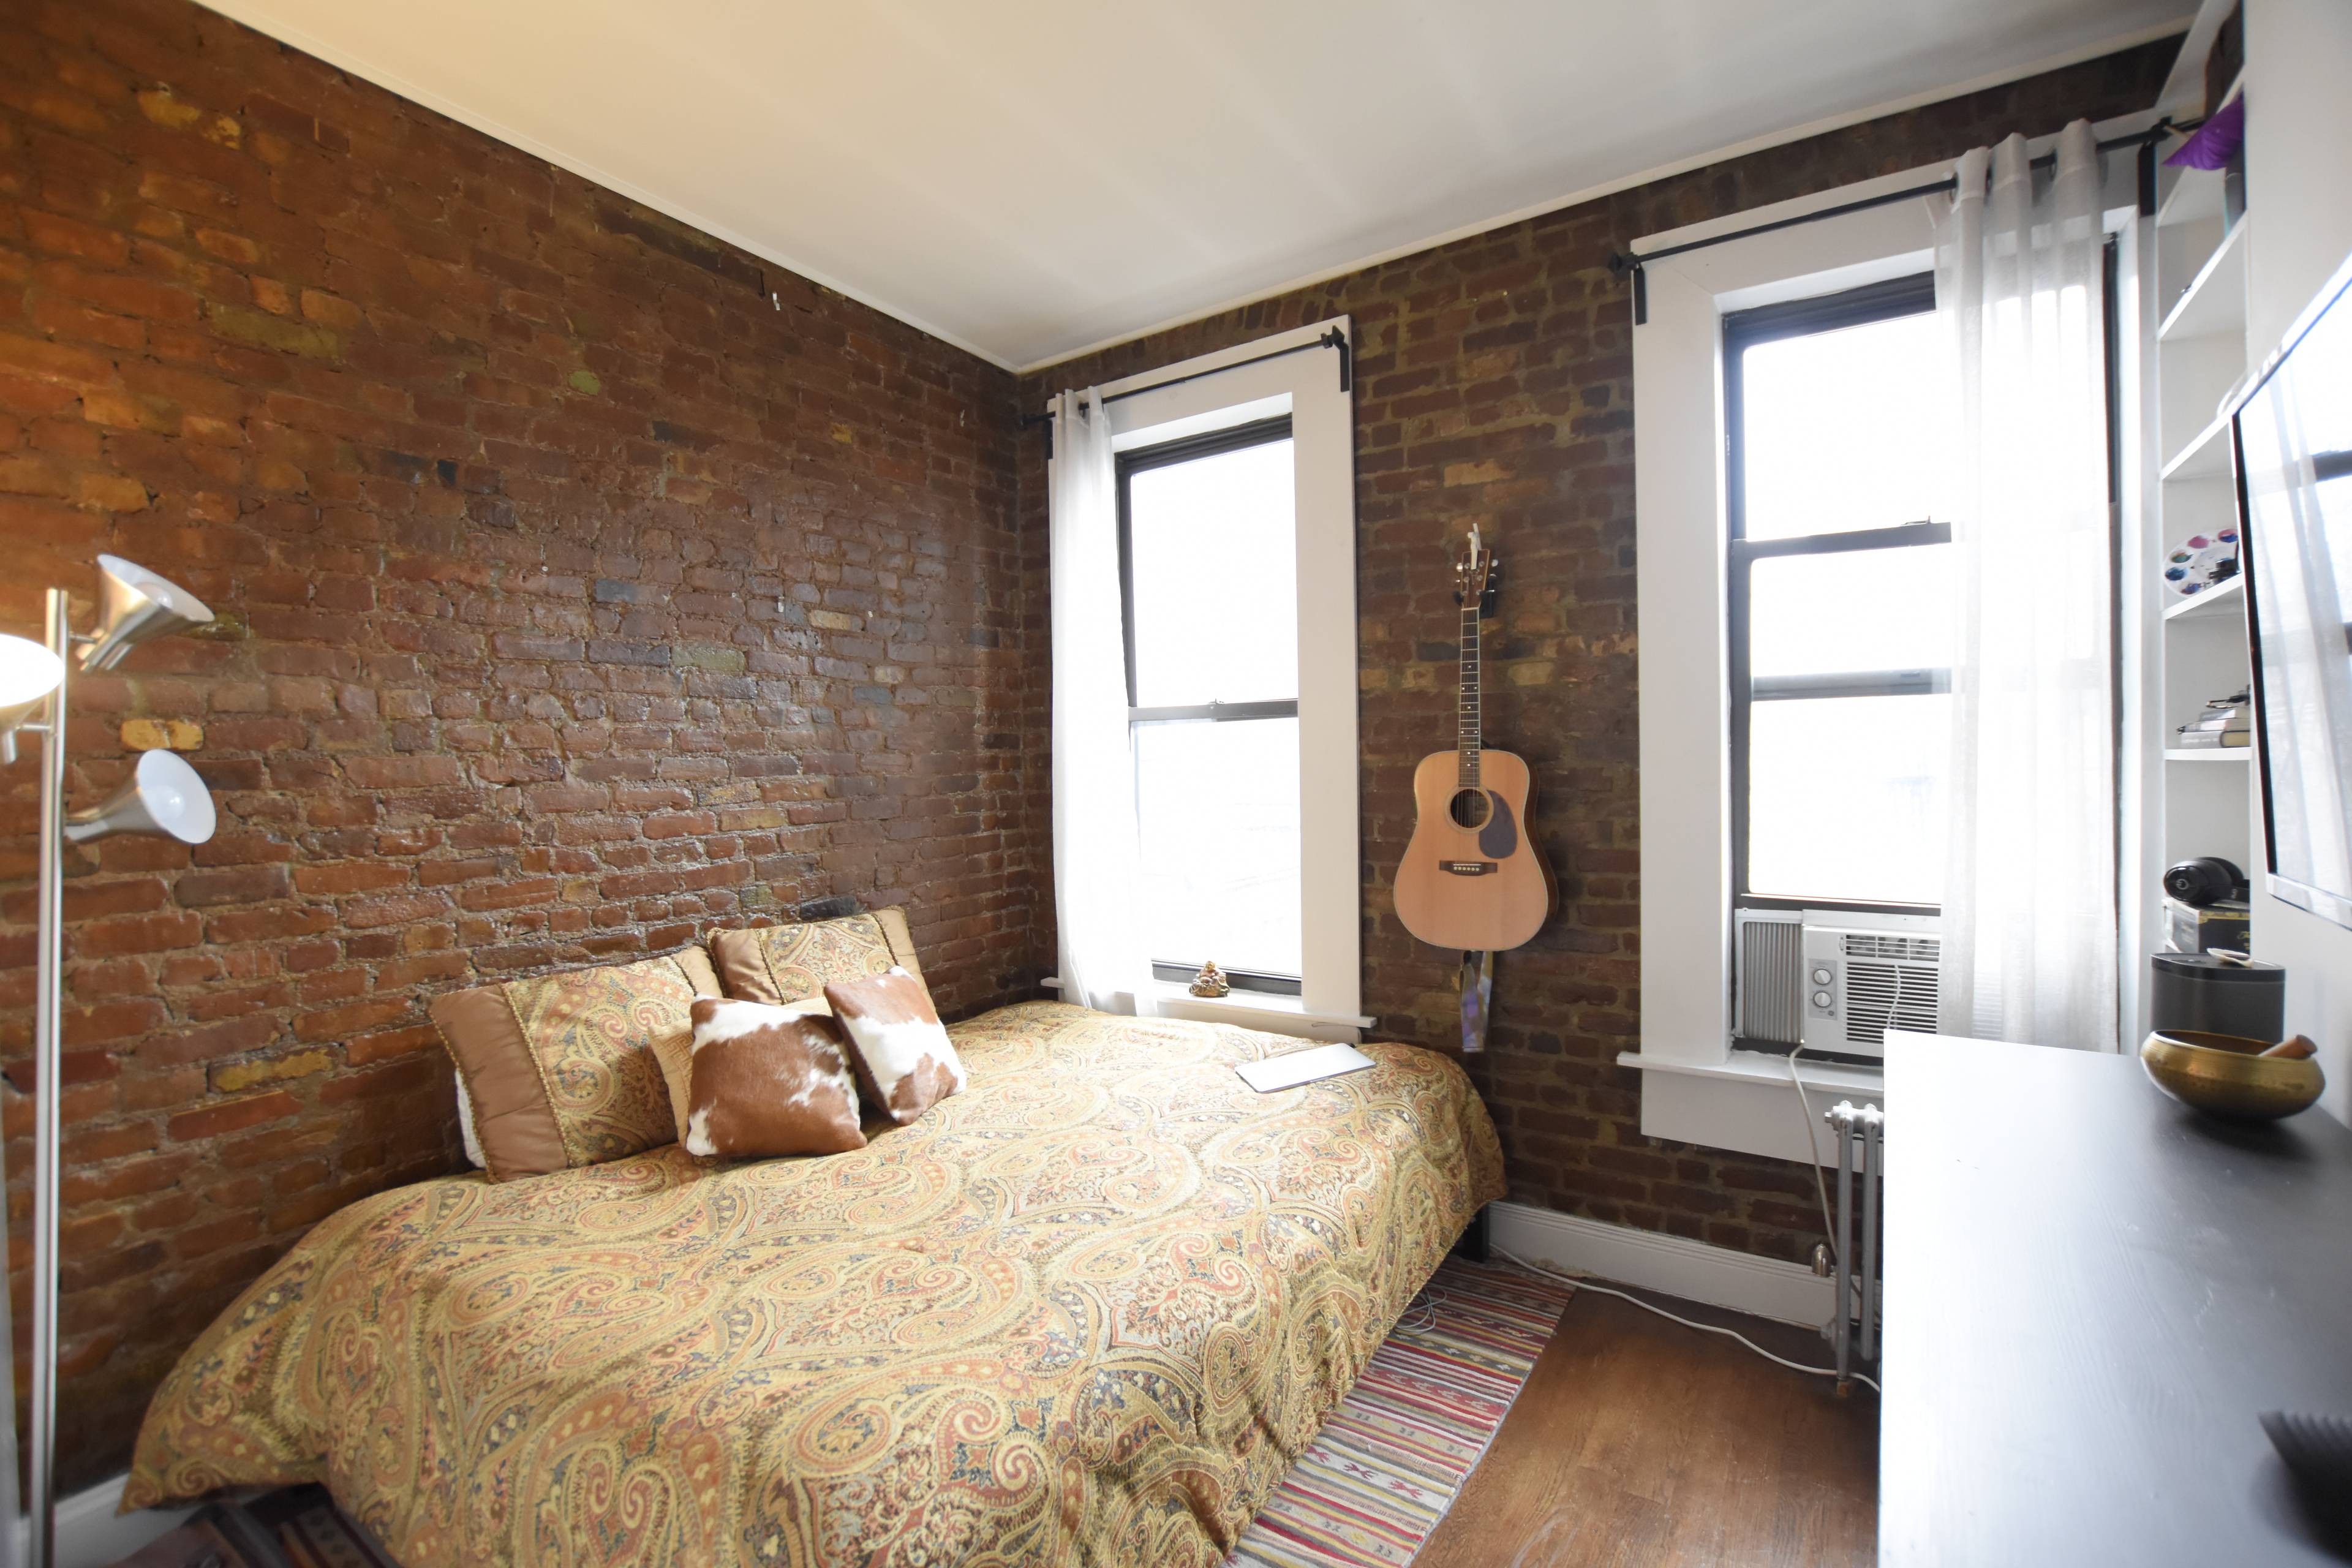 2 bedroom located on Broome amp ; Orchard St in the heart of the Lower East Side !